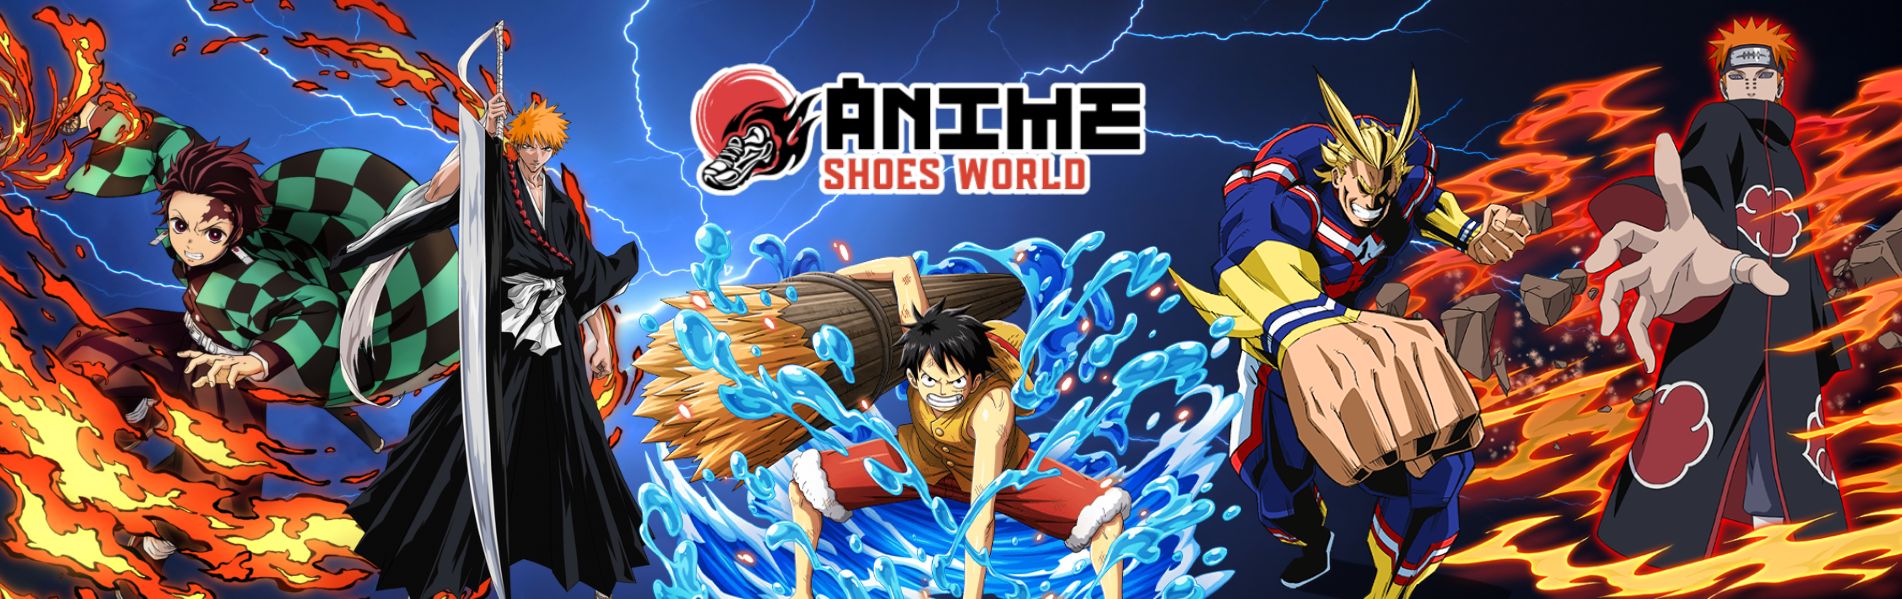 Anime Shoes World Banner